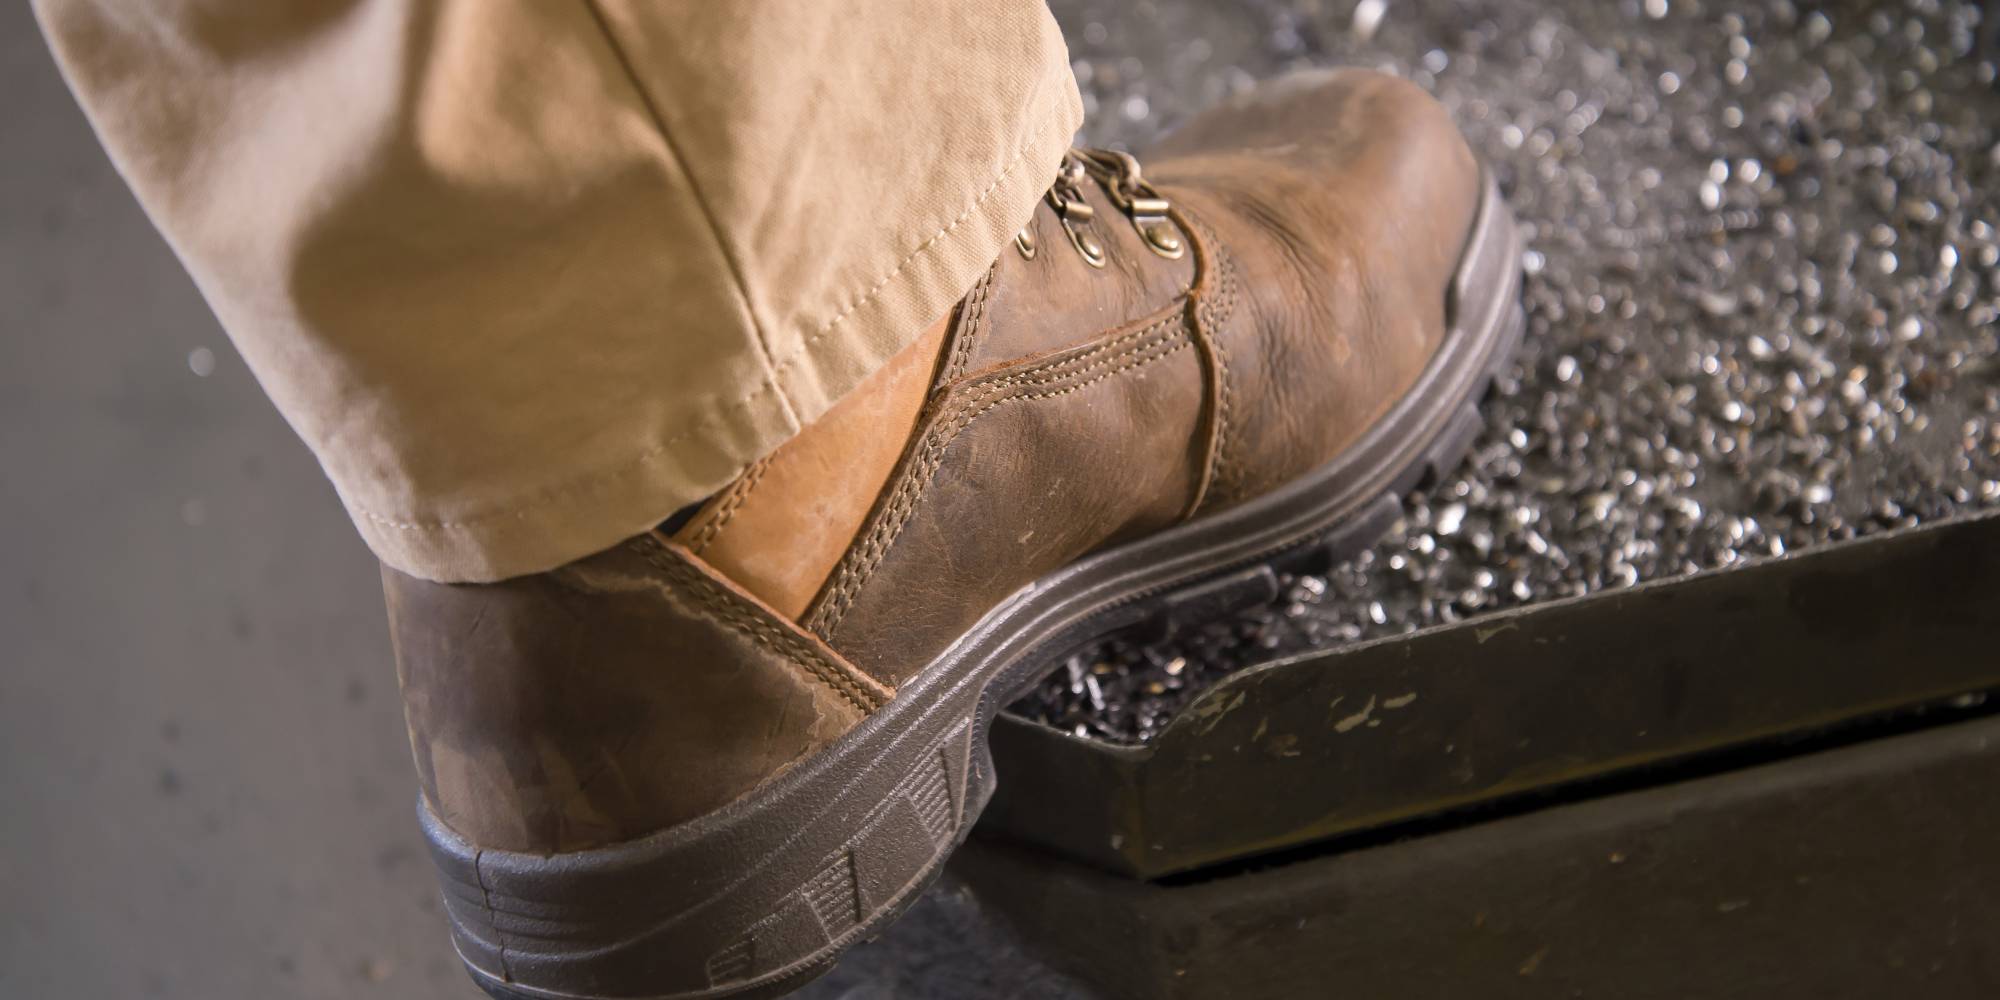 Reasons to Wear Safety Toe Shoes